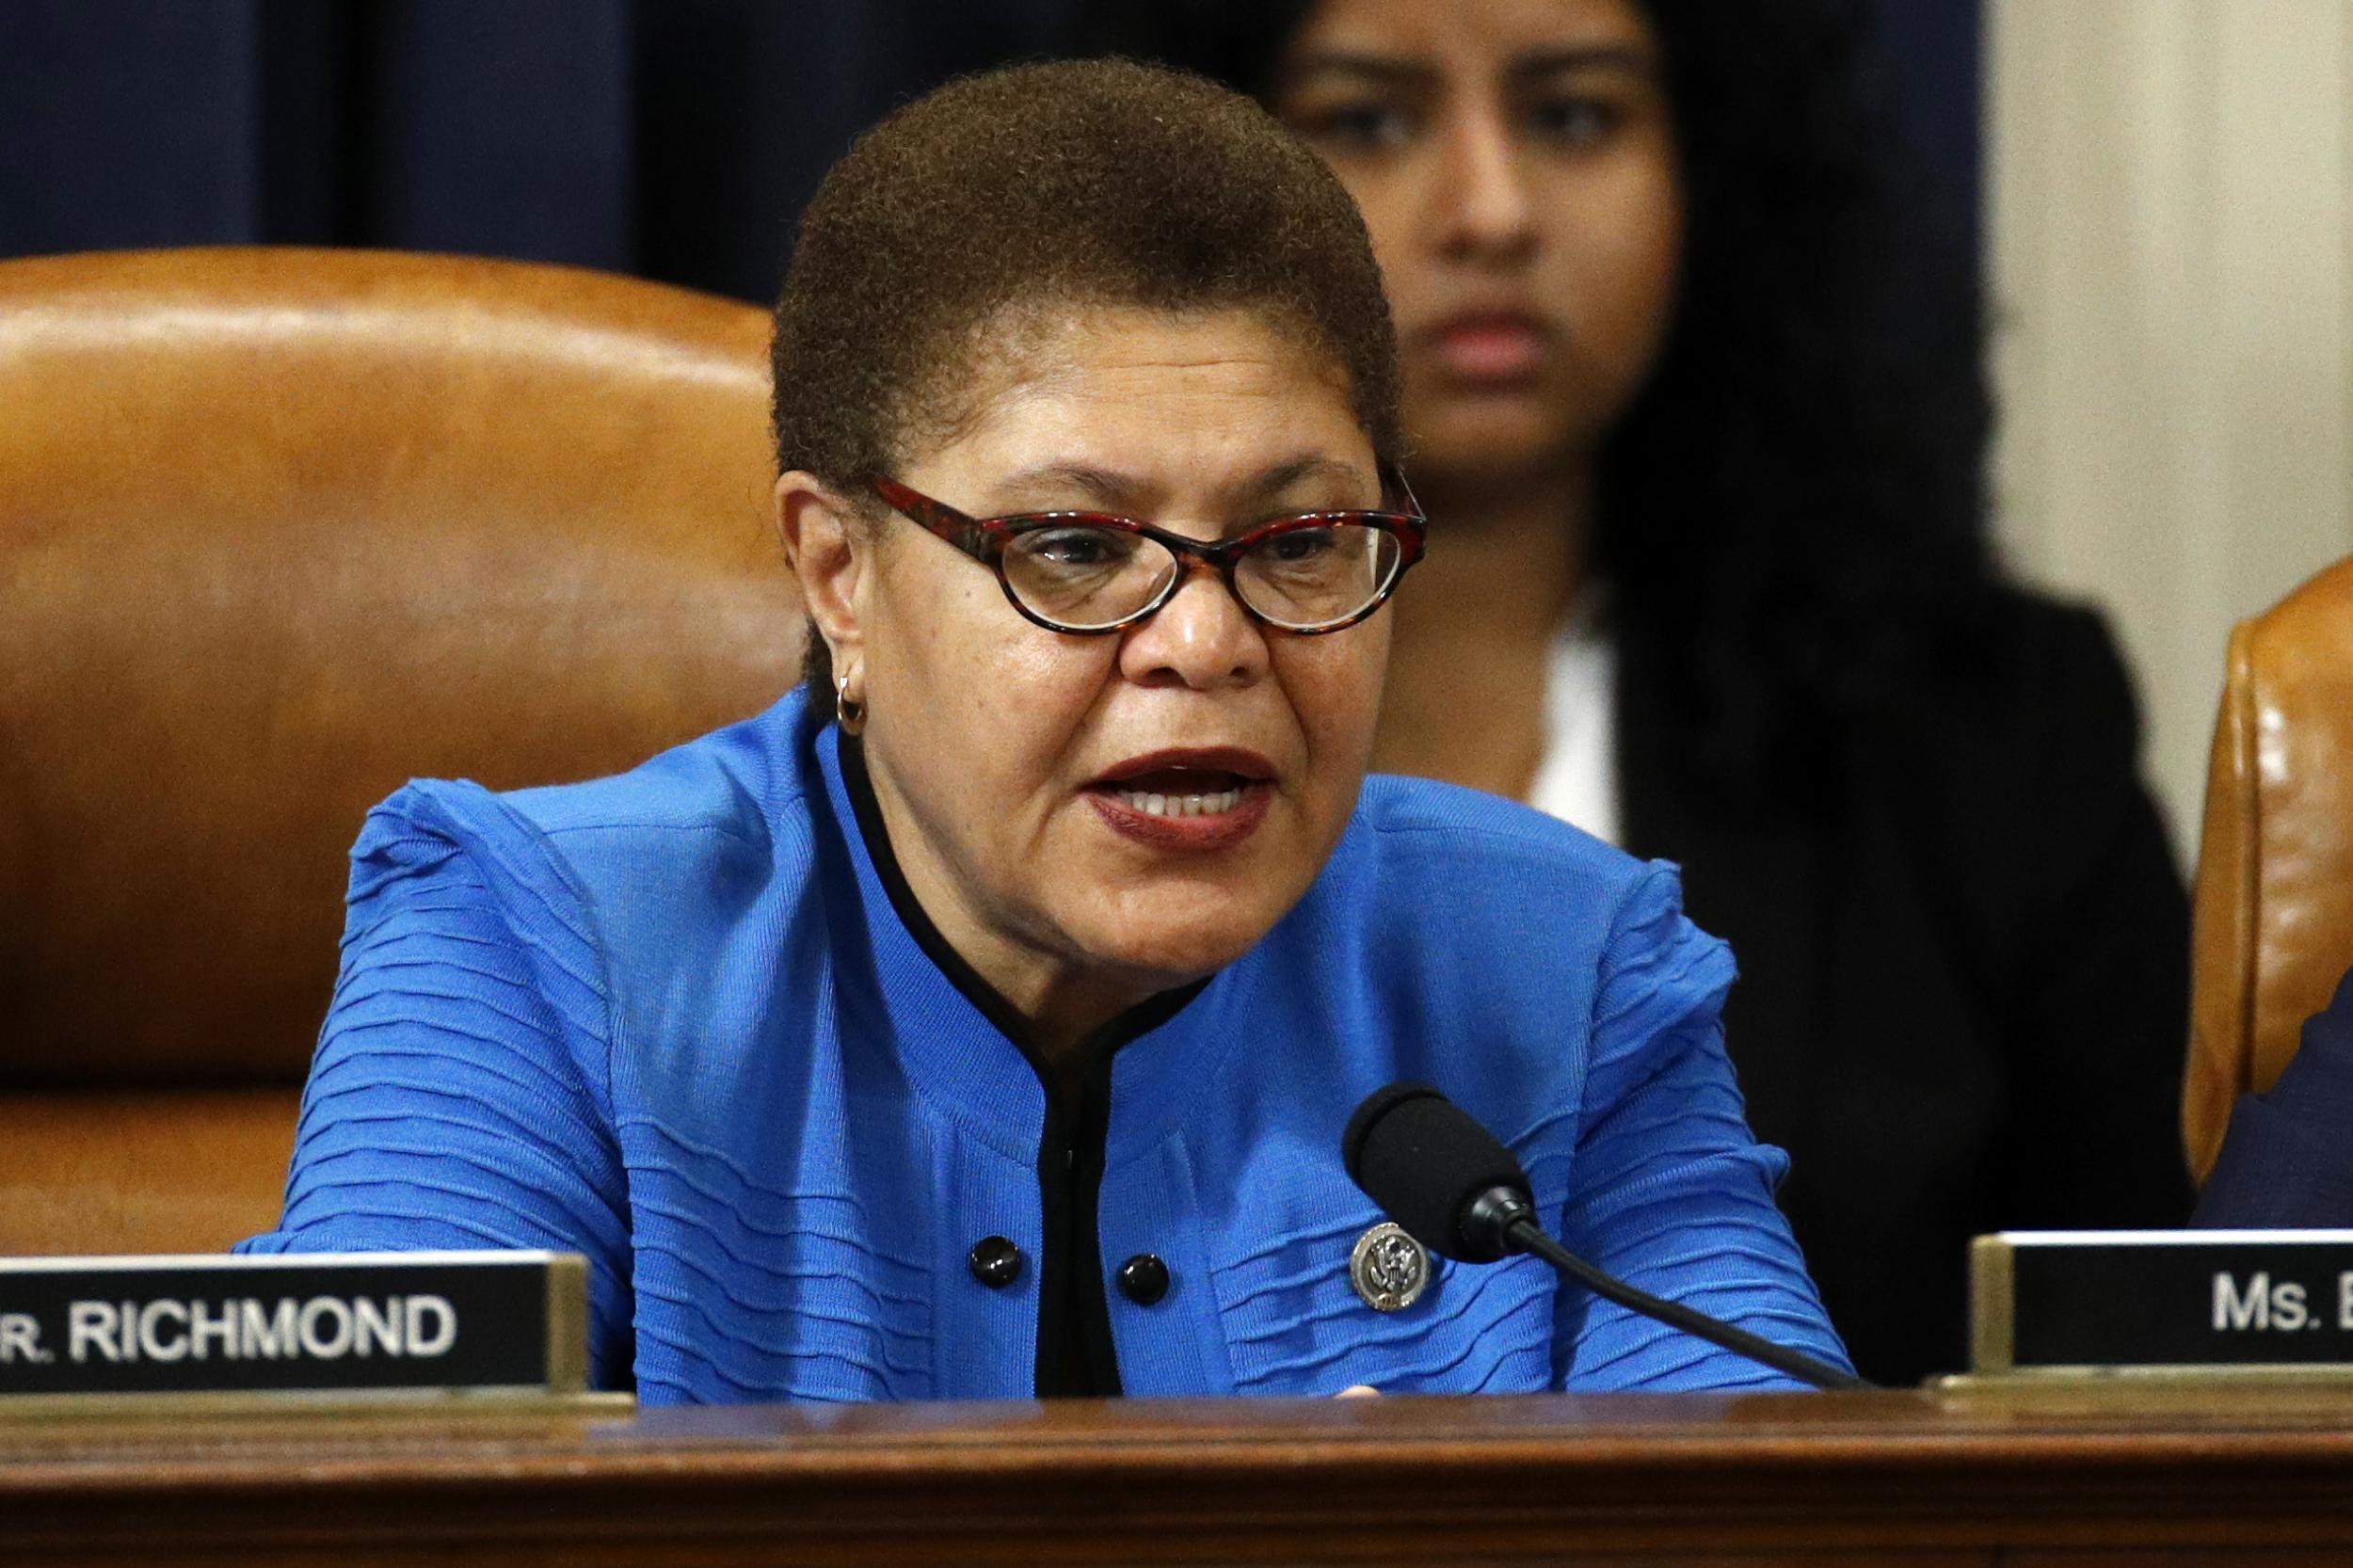 Karen Bass votes to approve the second article of impeachment against Donald Trump on 13 December, 2019